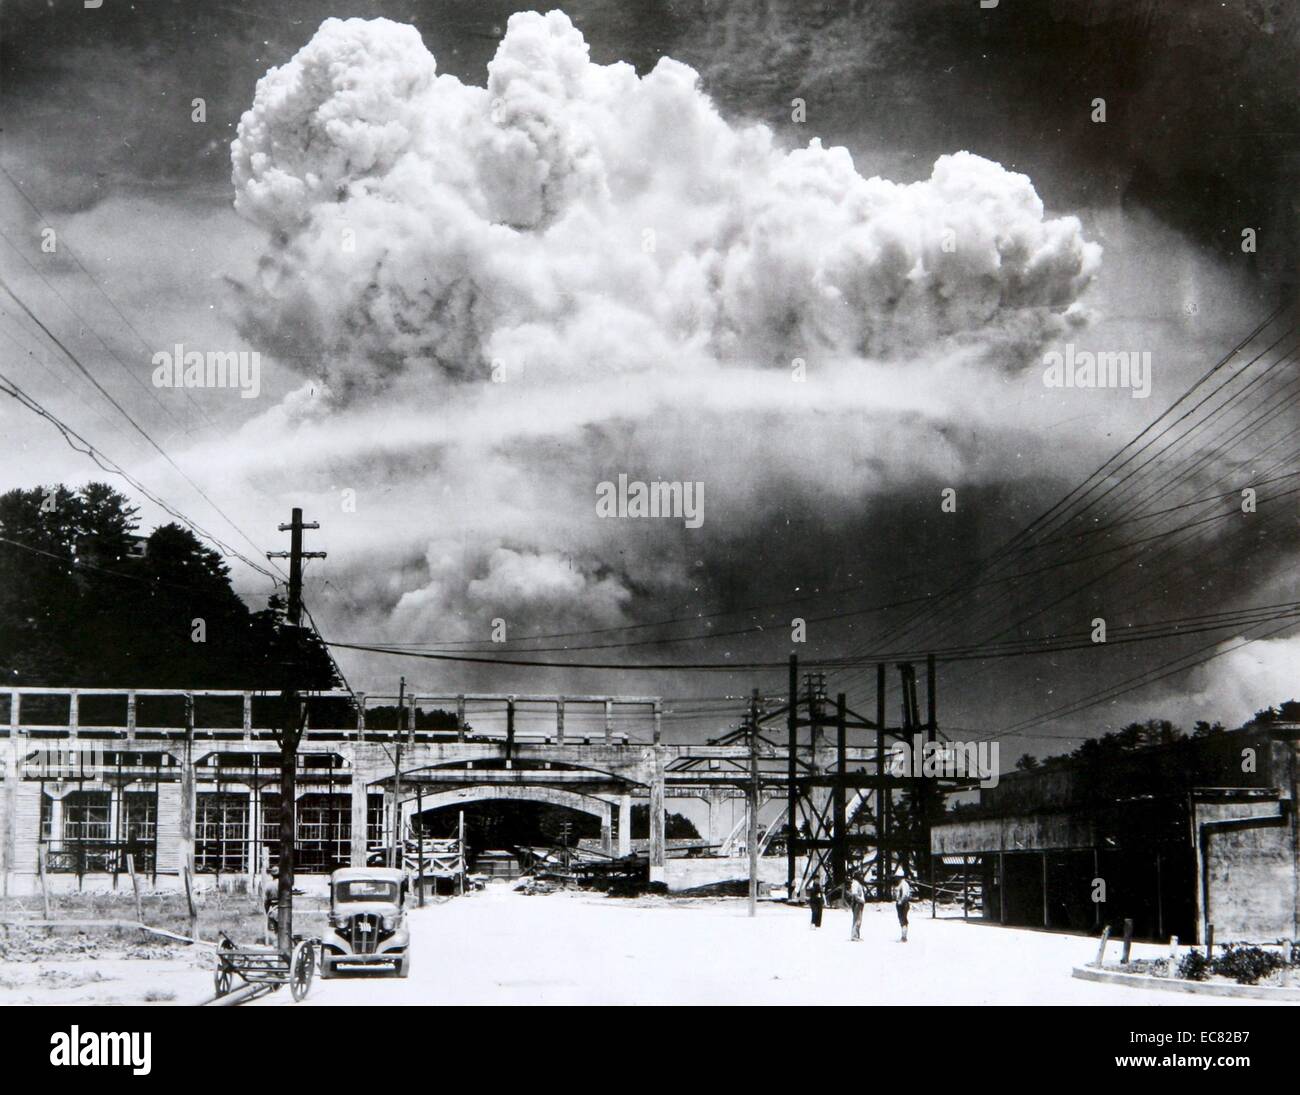 the nuclear bombing of Nagasaki; Japan, 9th August 1945 during world war two. Stock Photo